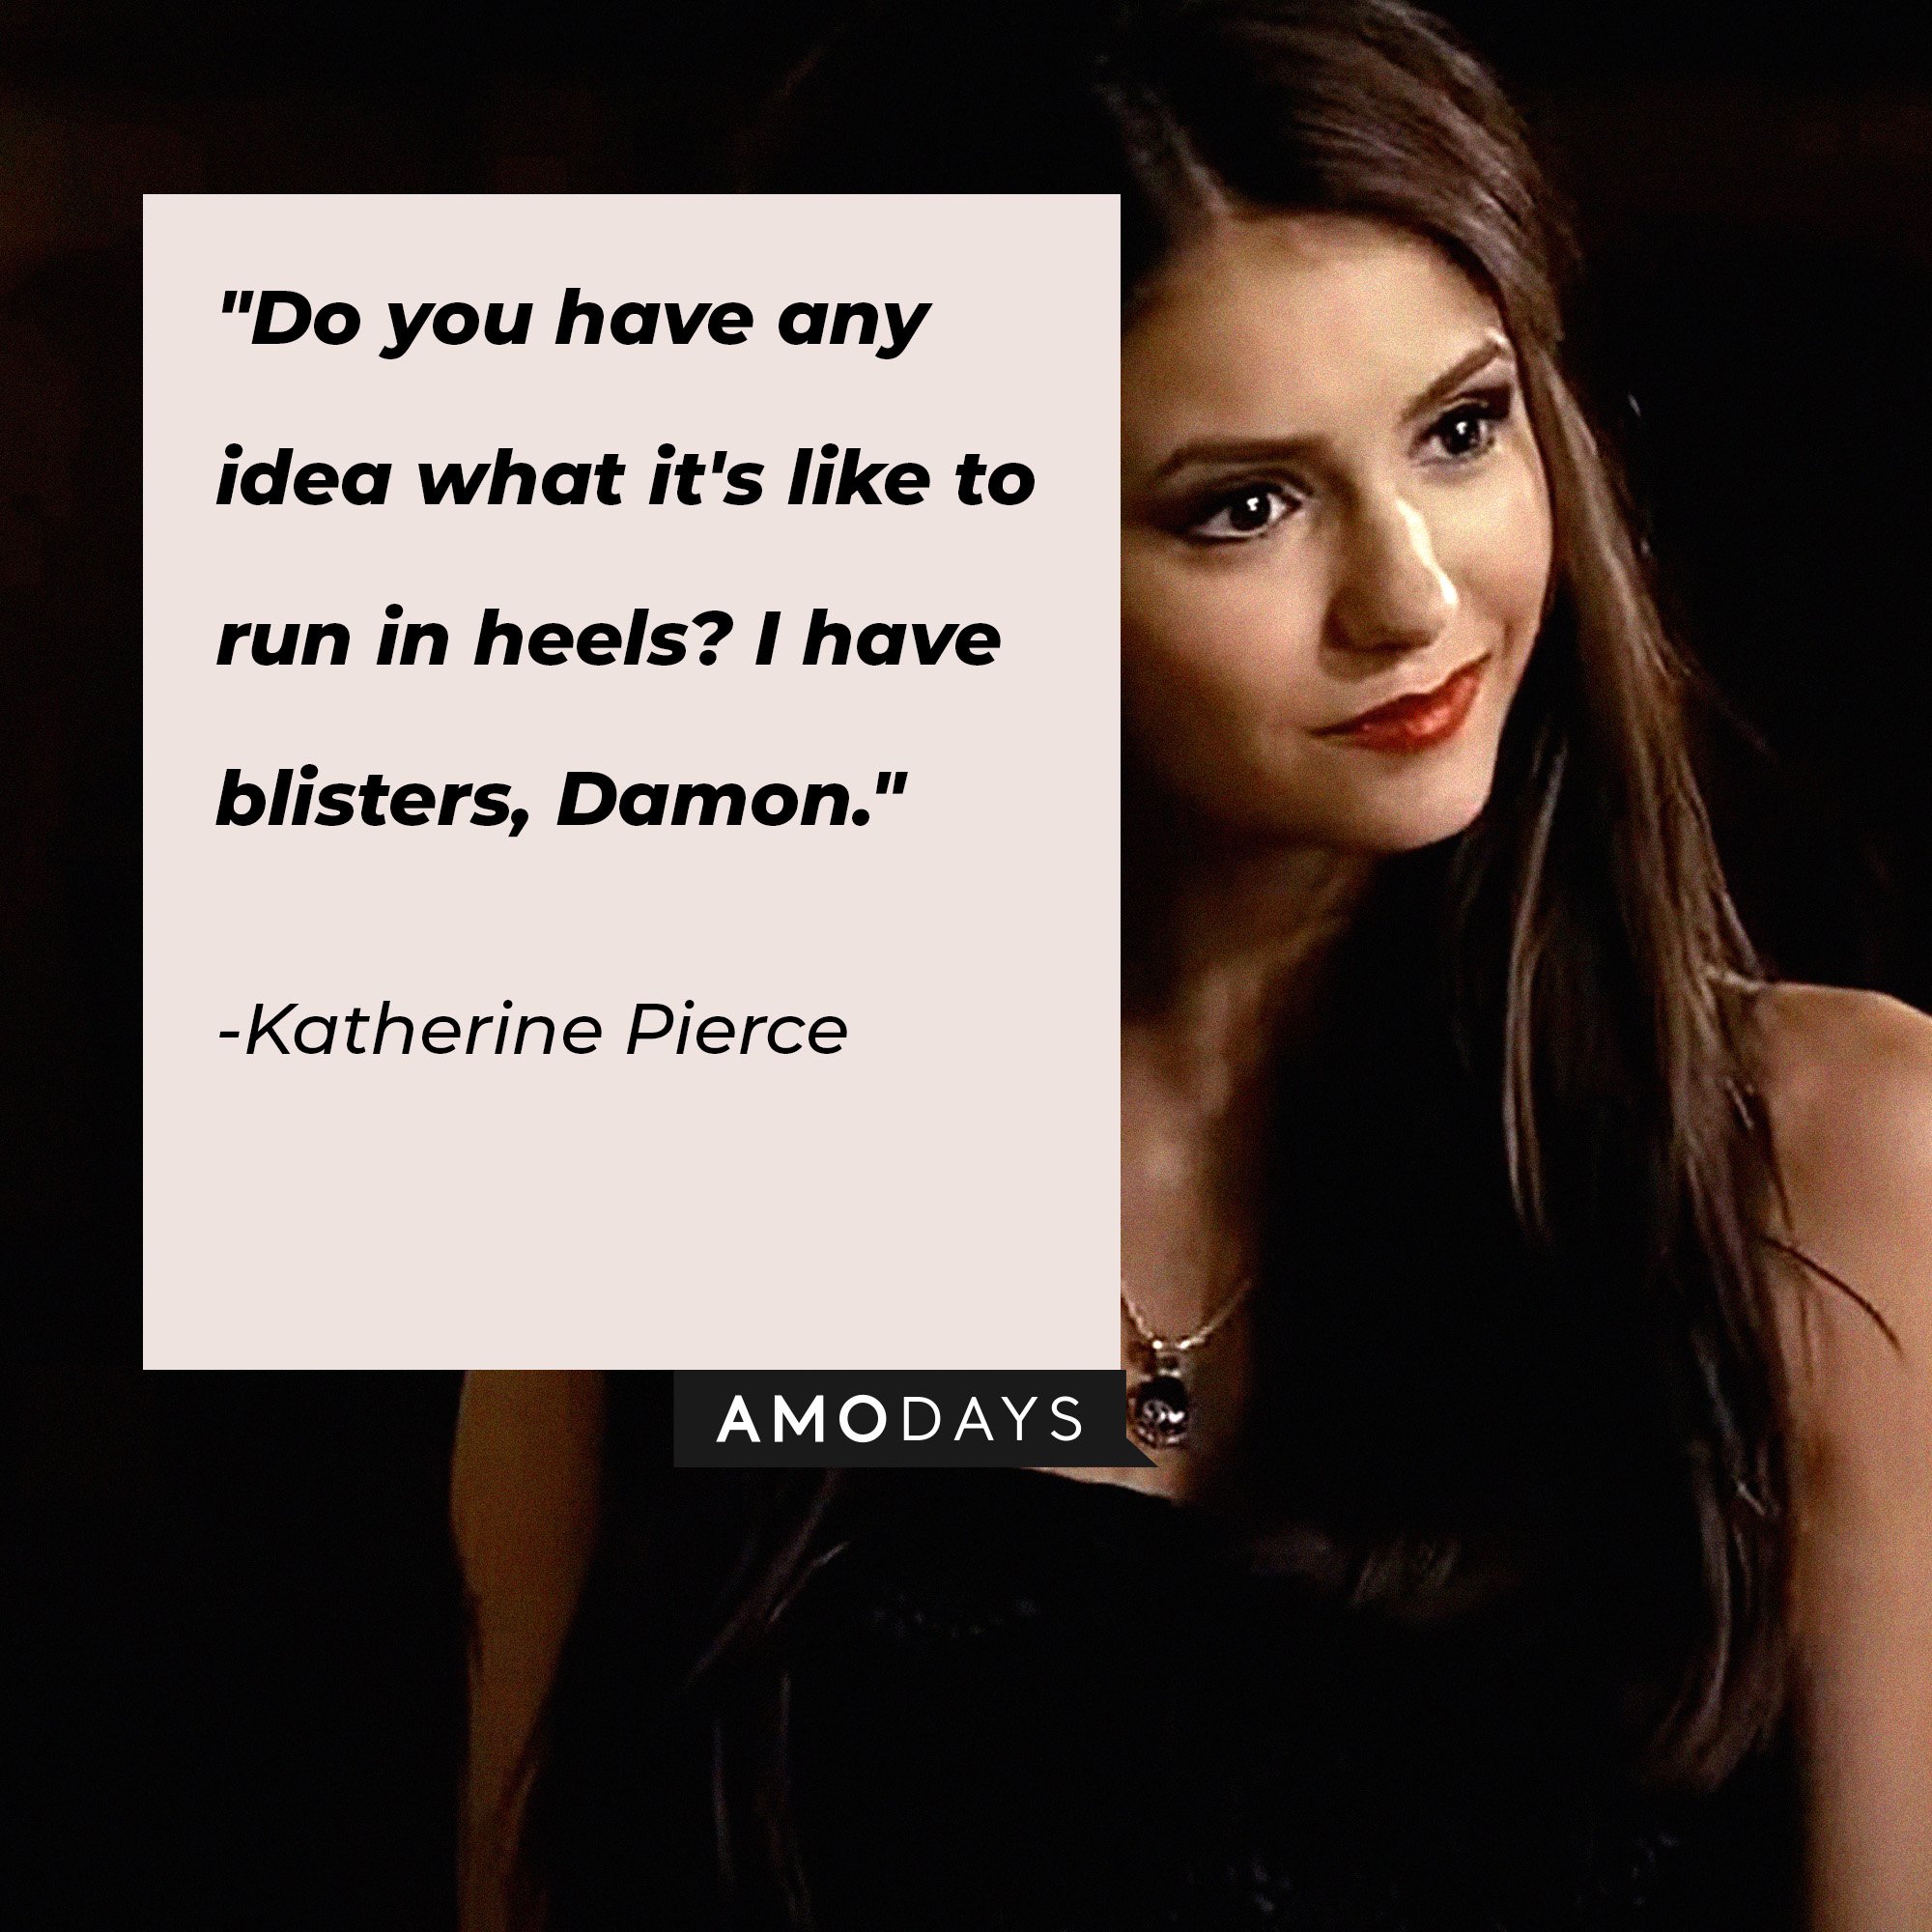 Katherine Pierce's quote:  "Do you have any idea what it's like to run in heels? I have blisters, Damon." | Image: AmoDays